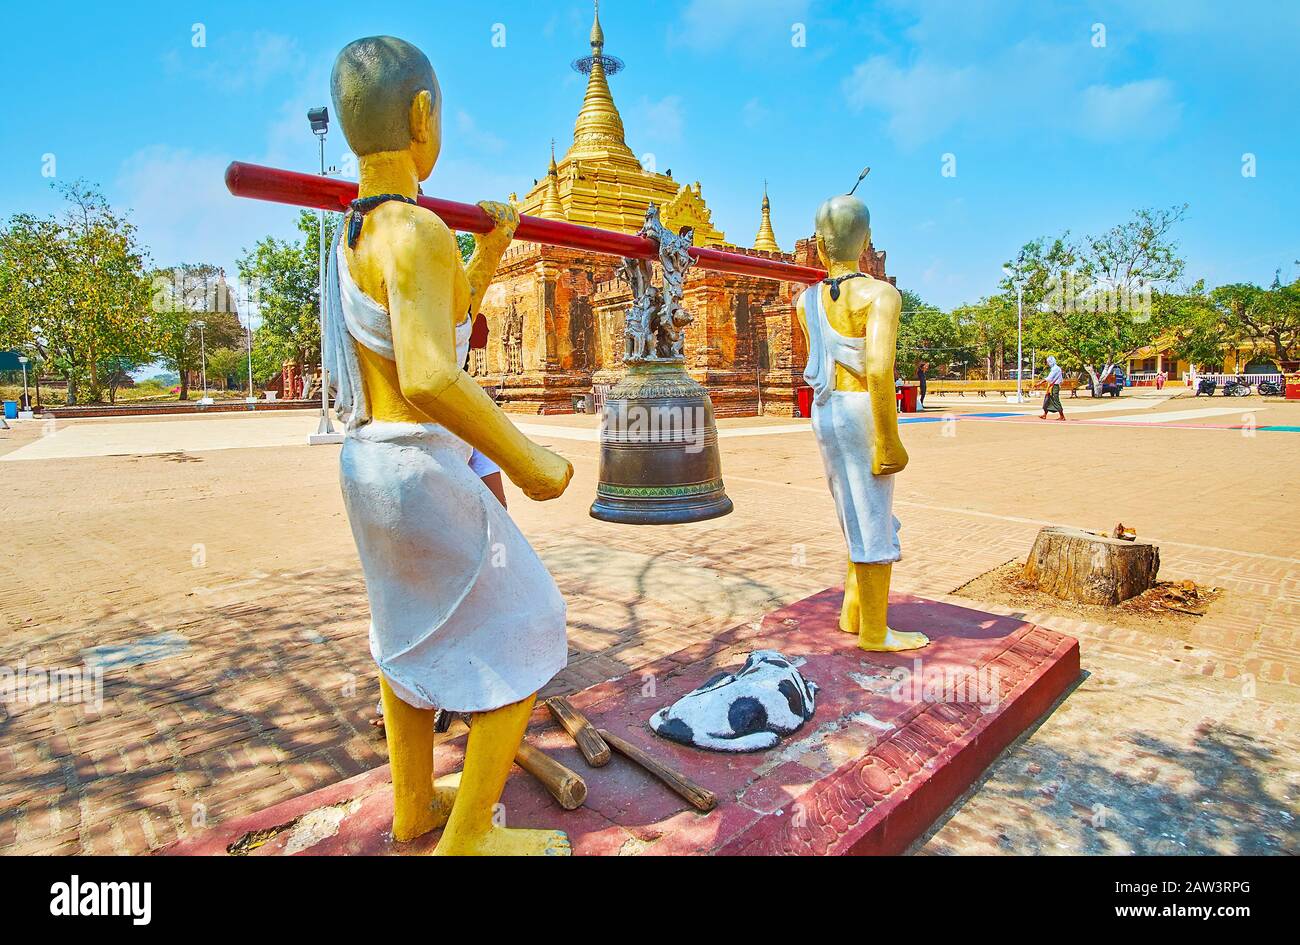 The Buddhist ritual bell with sculptures, holding it, located at the Alo-daw Pyi Pagoda, Bagan, Myanmar Stock Photo